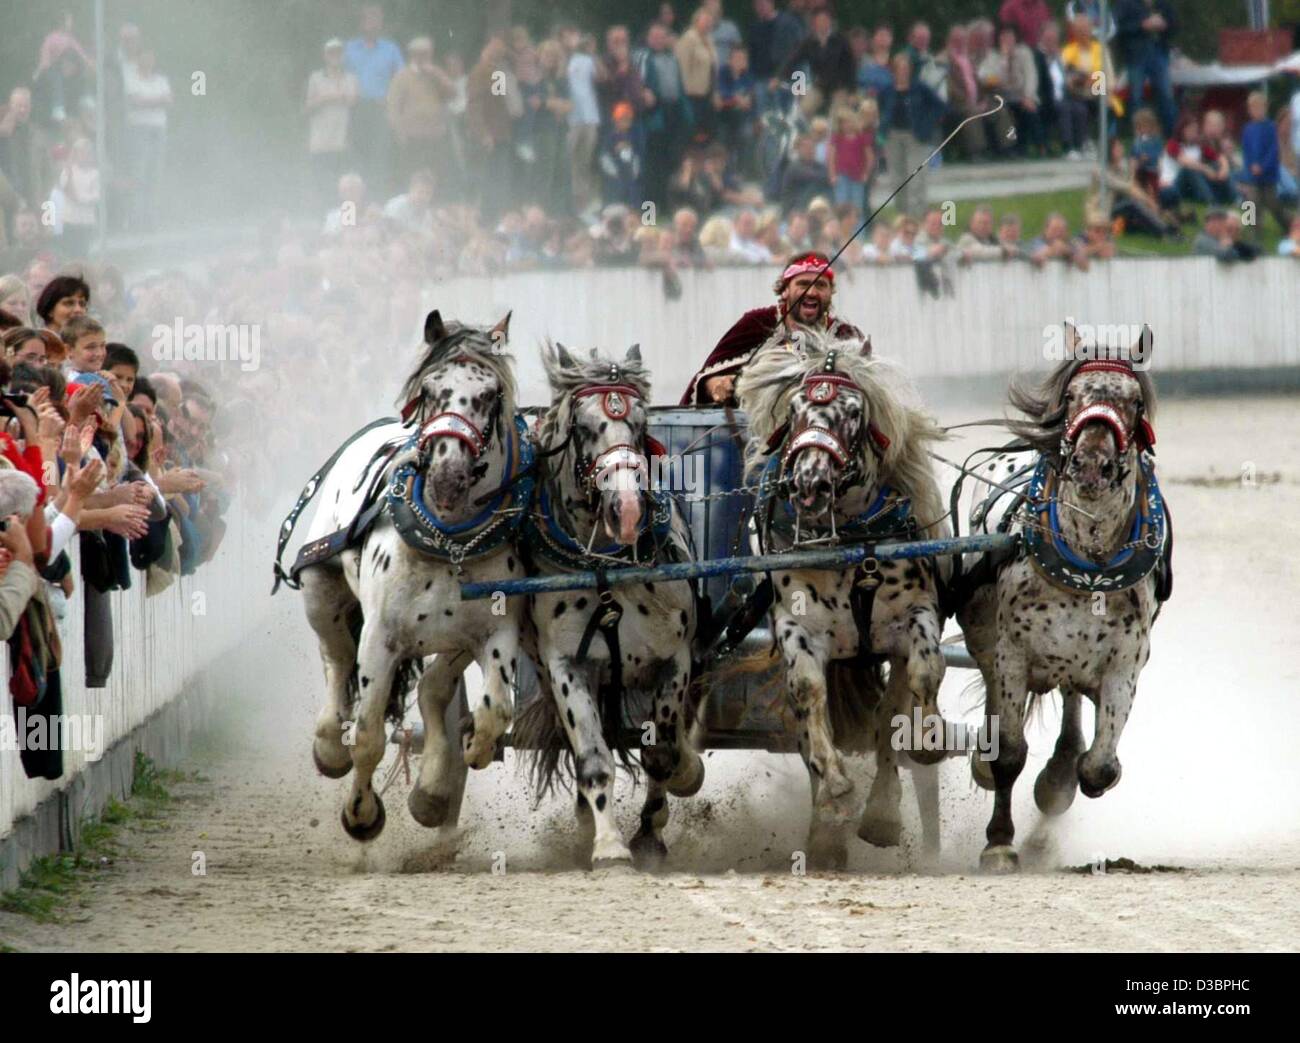 (dpa) - A Roman chariot races past spectators during the Quadriga Day at the horse race track in Pfarrkirchen, Germany, 3 October 2003. The chariots with 4 hp reach up to 70 kmph. Stock Photo